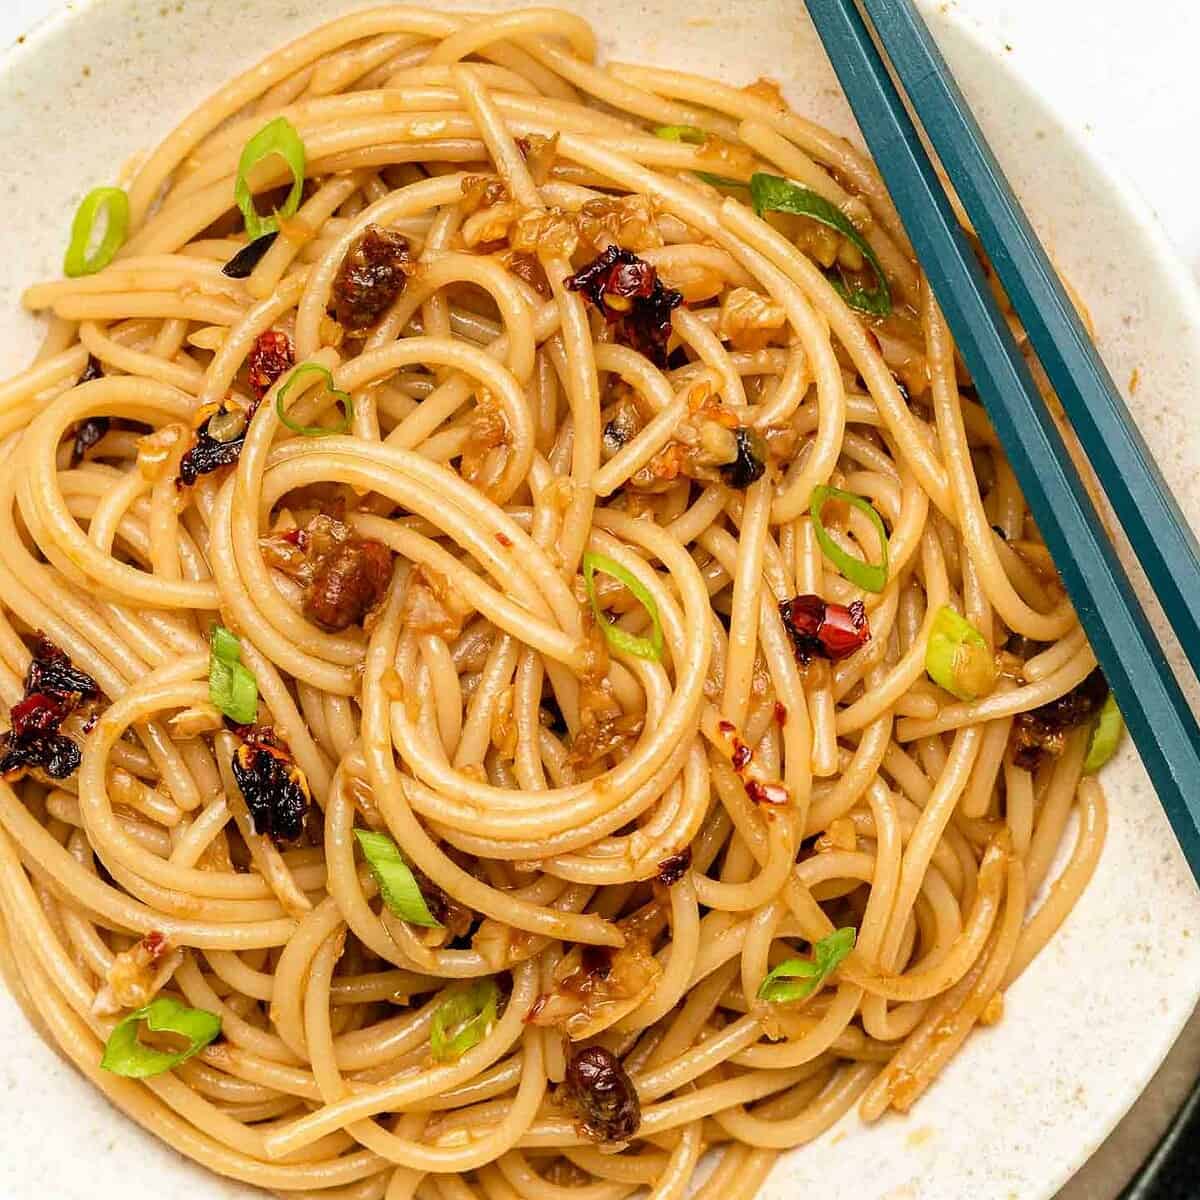  A delicious medley of vegetables and ginger sauce that make these Vegan Garlic Asian Noodles irresistible.